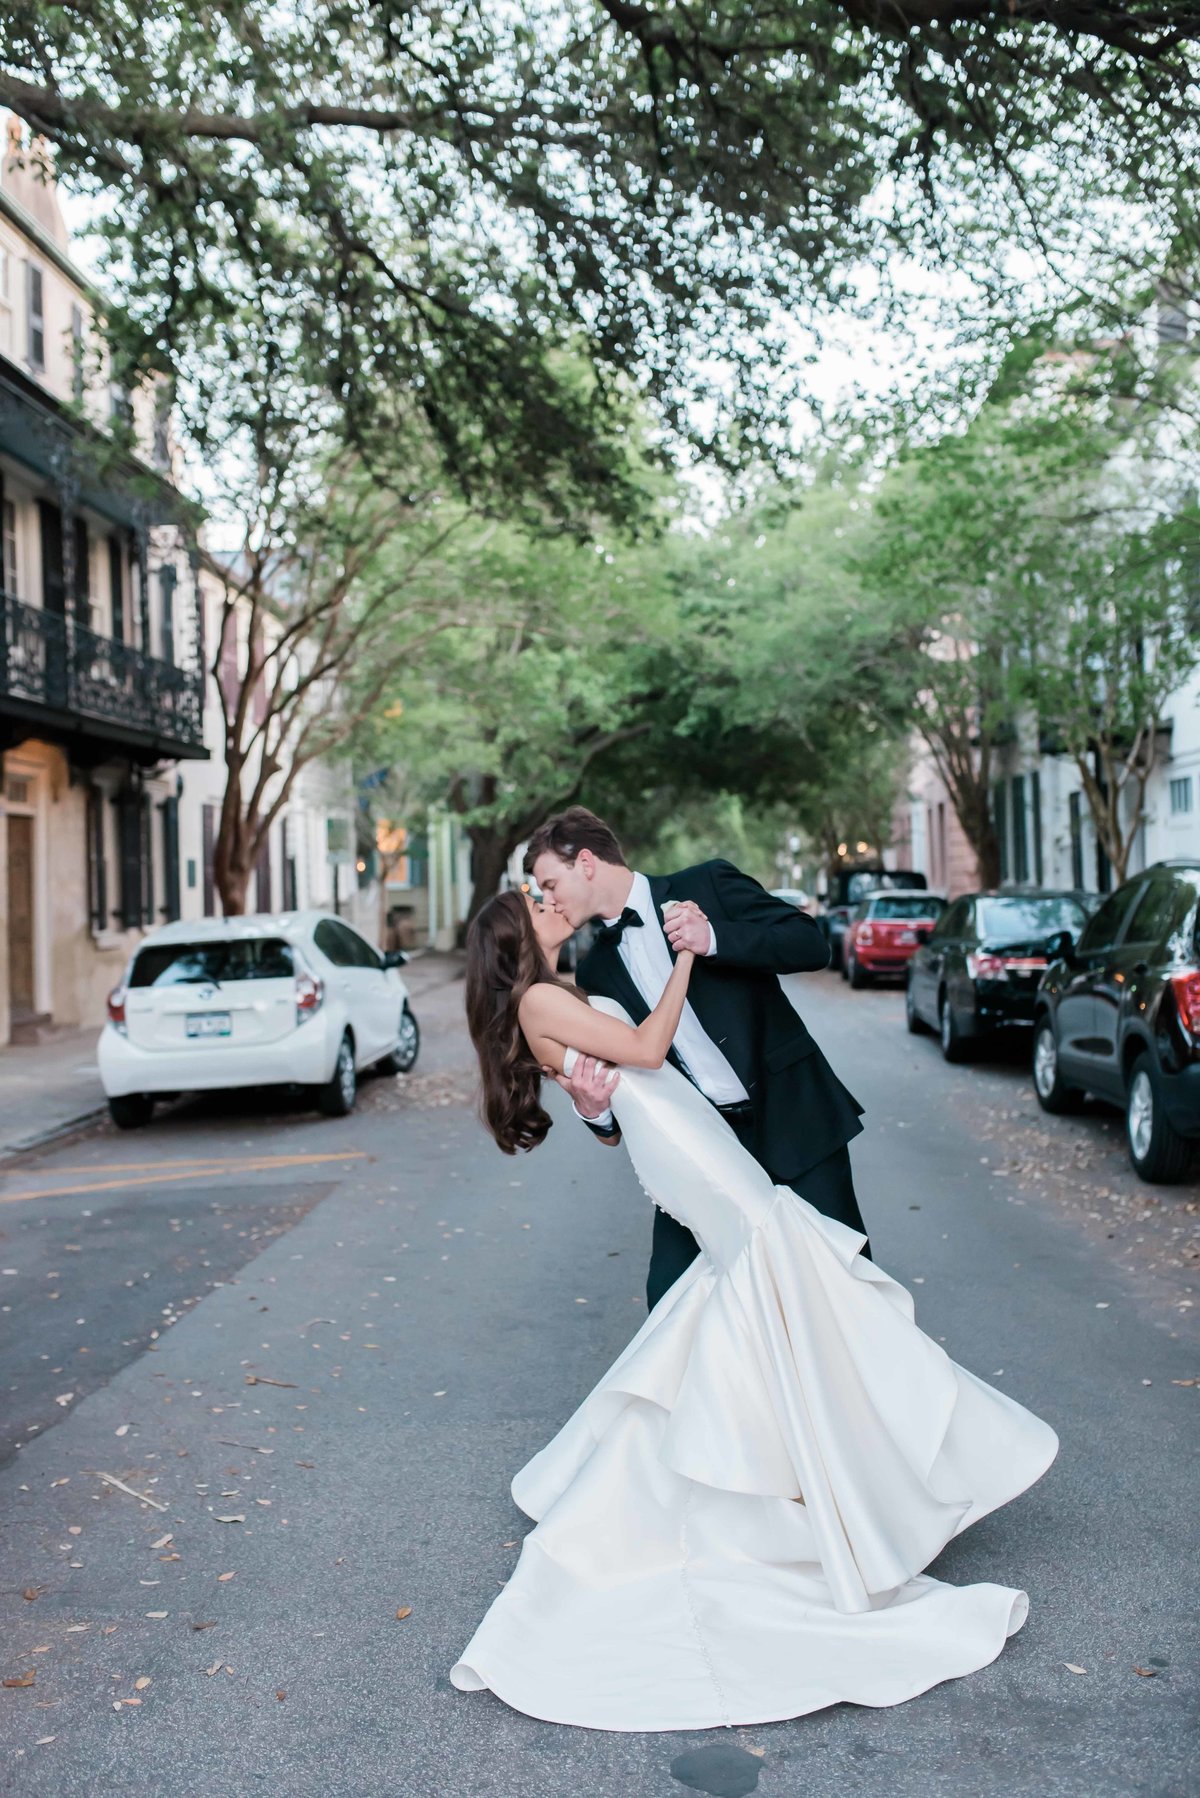 Bride and groom do a dip in the middle of the street in downtown Charleston, SC